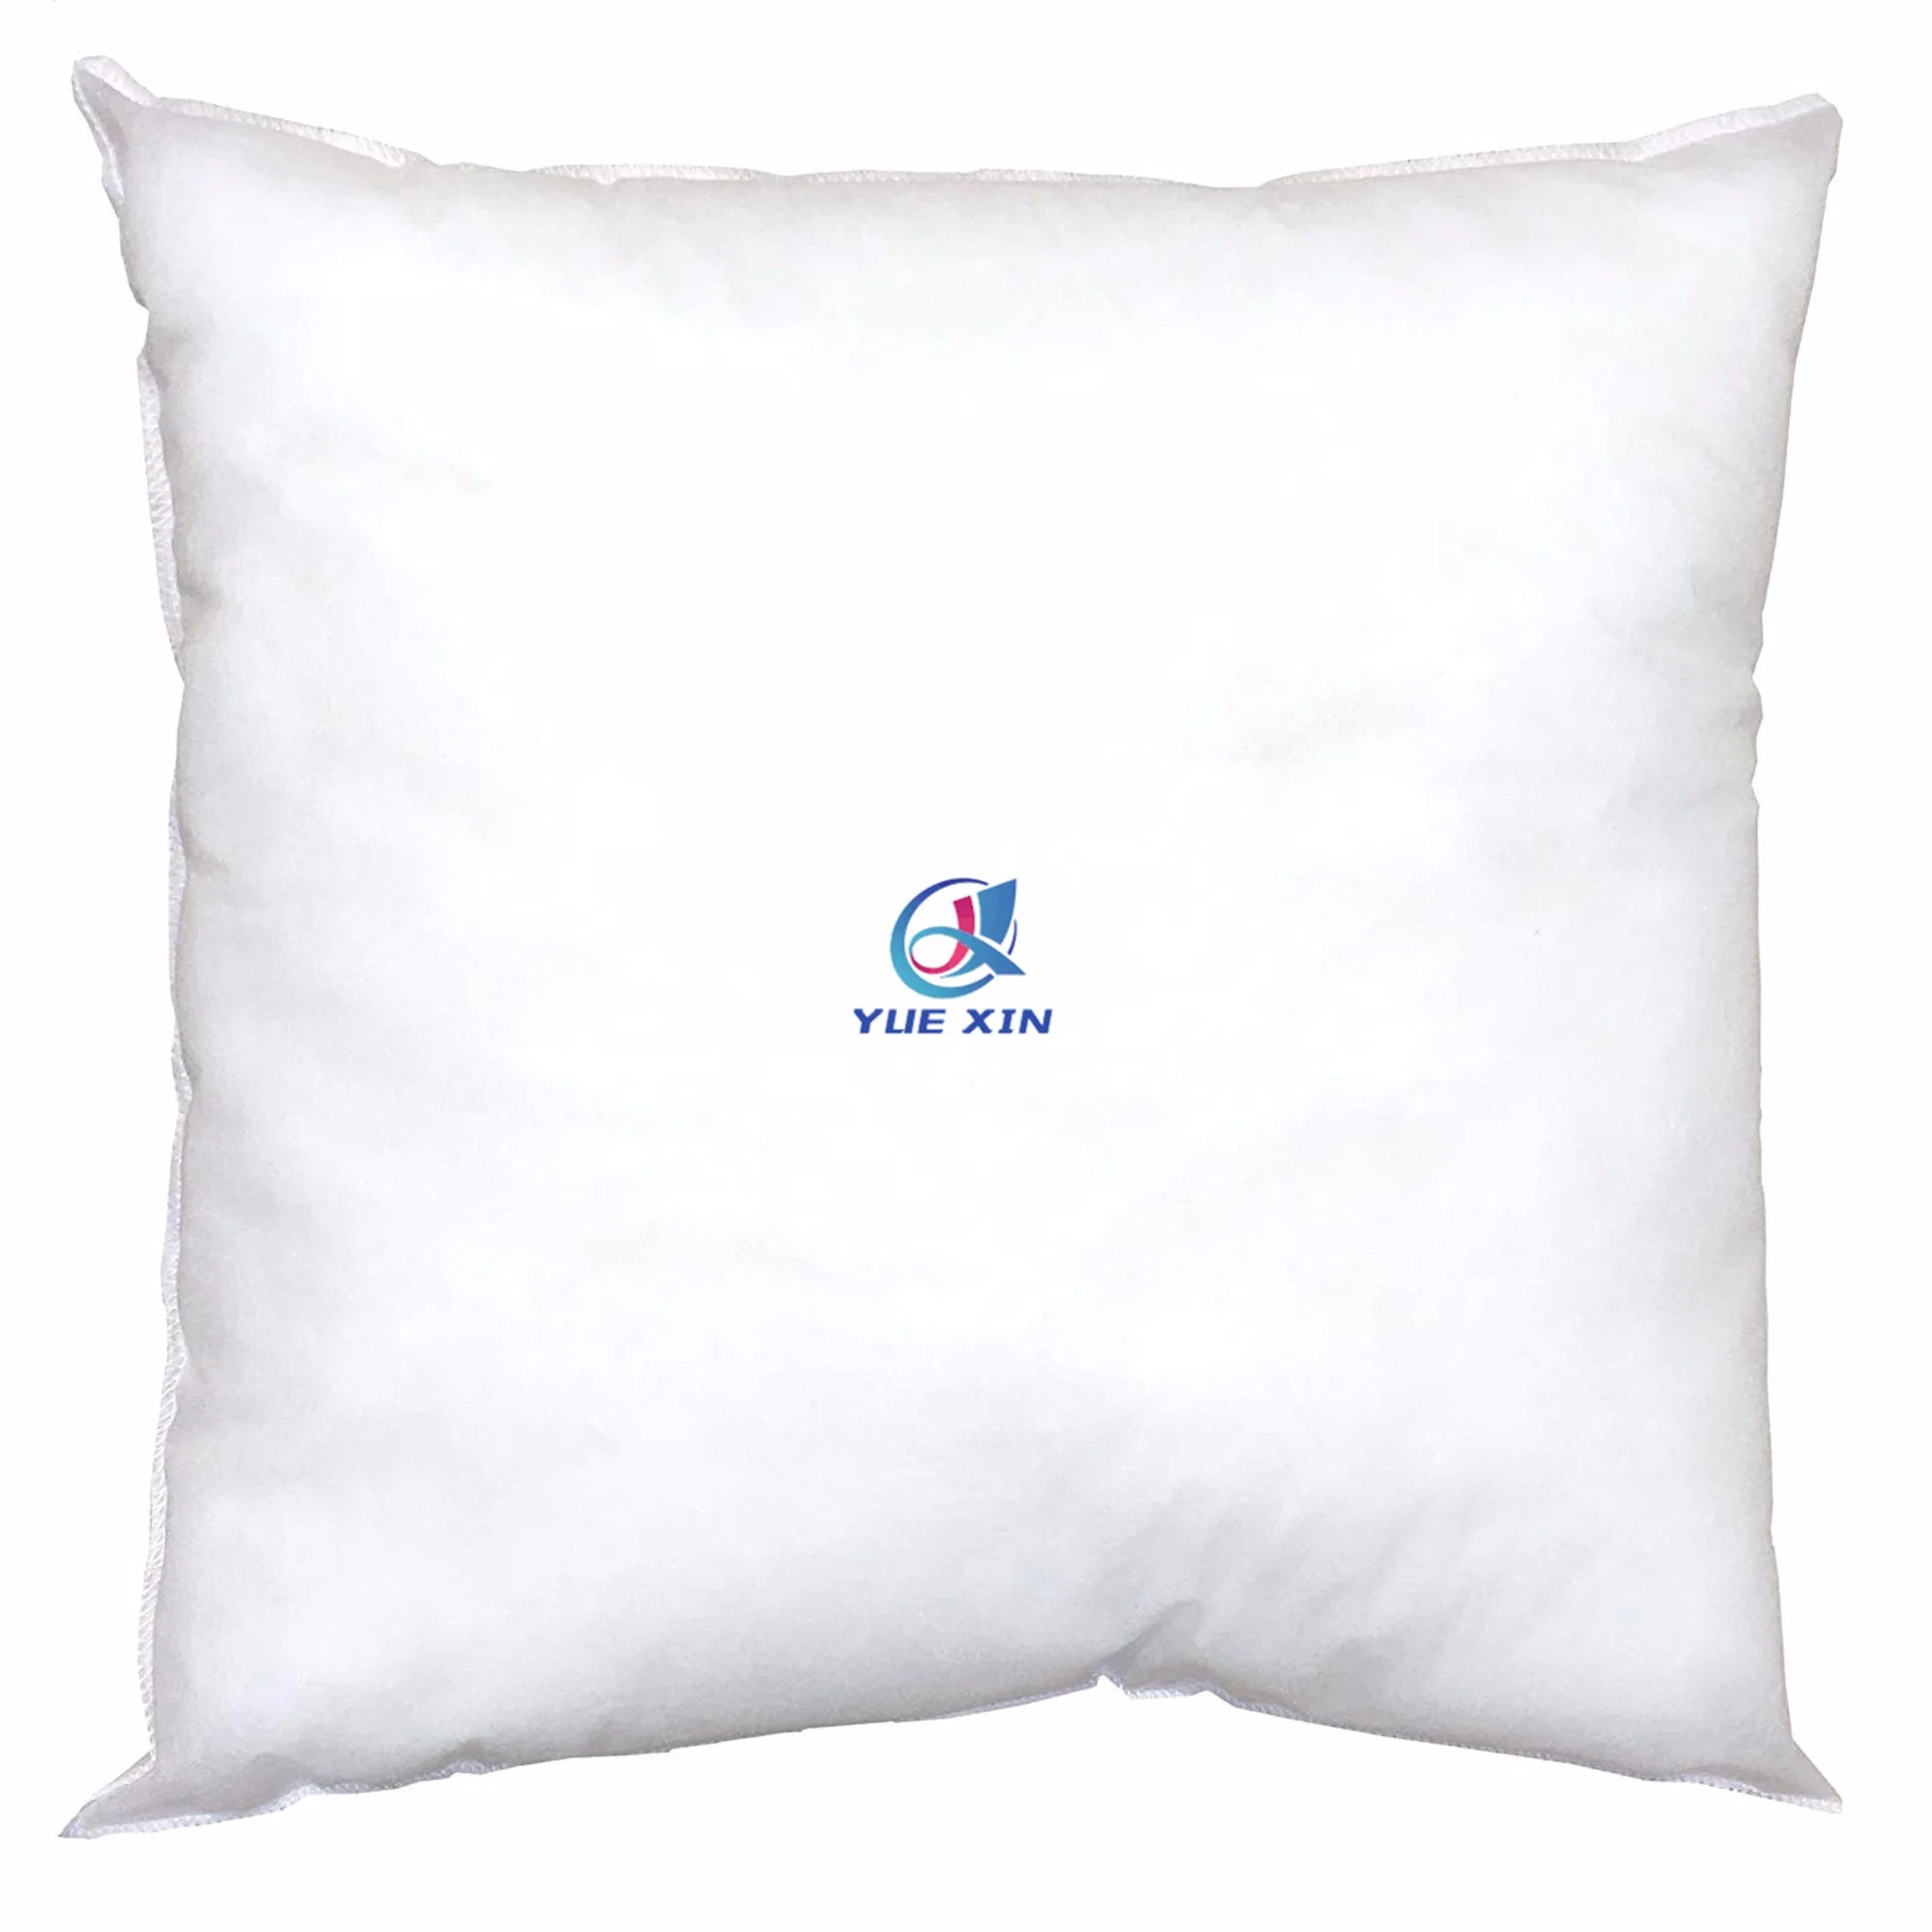 Non-Woven Pillow Form Insert for Shams or Decorative Pillow Covers